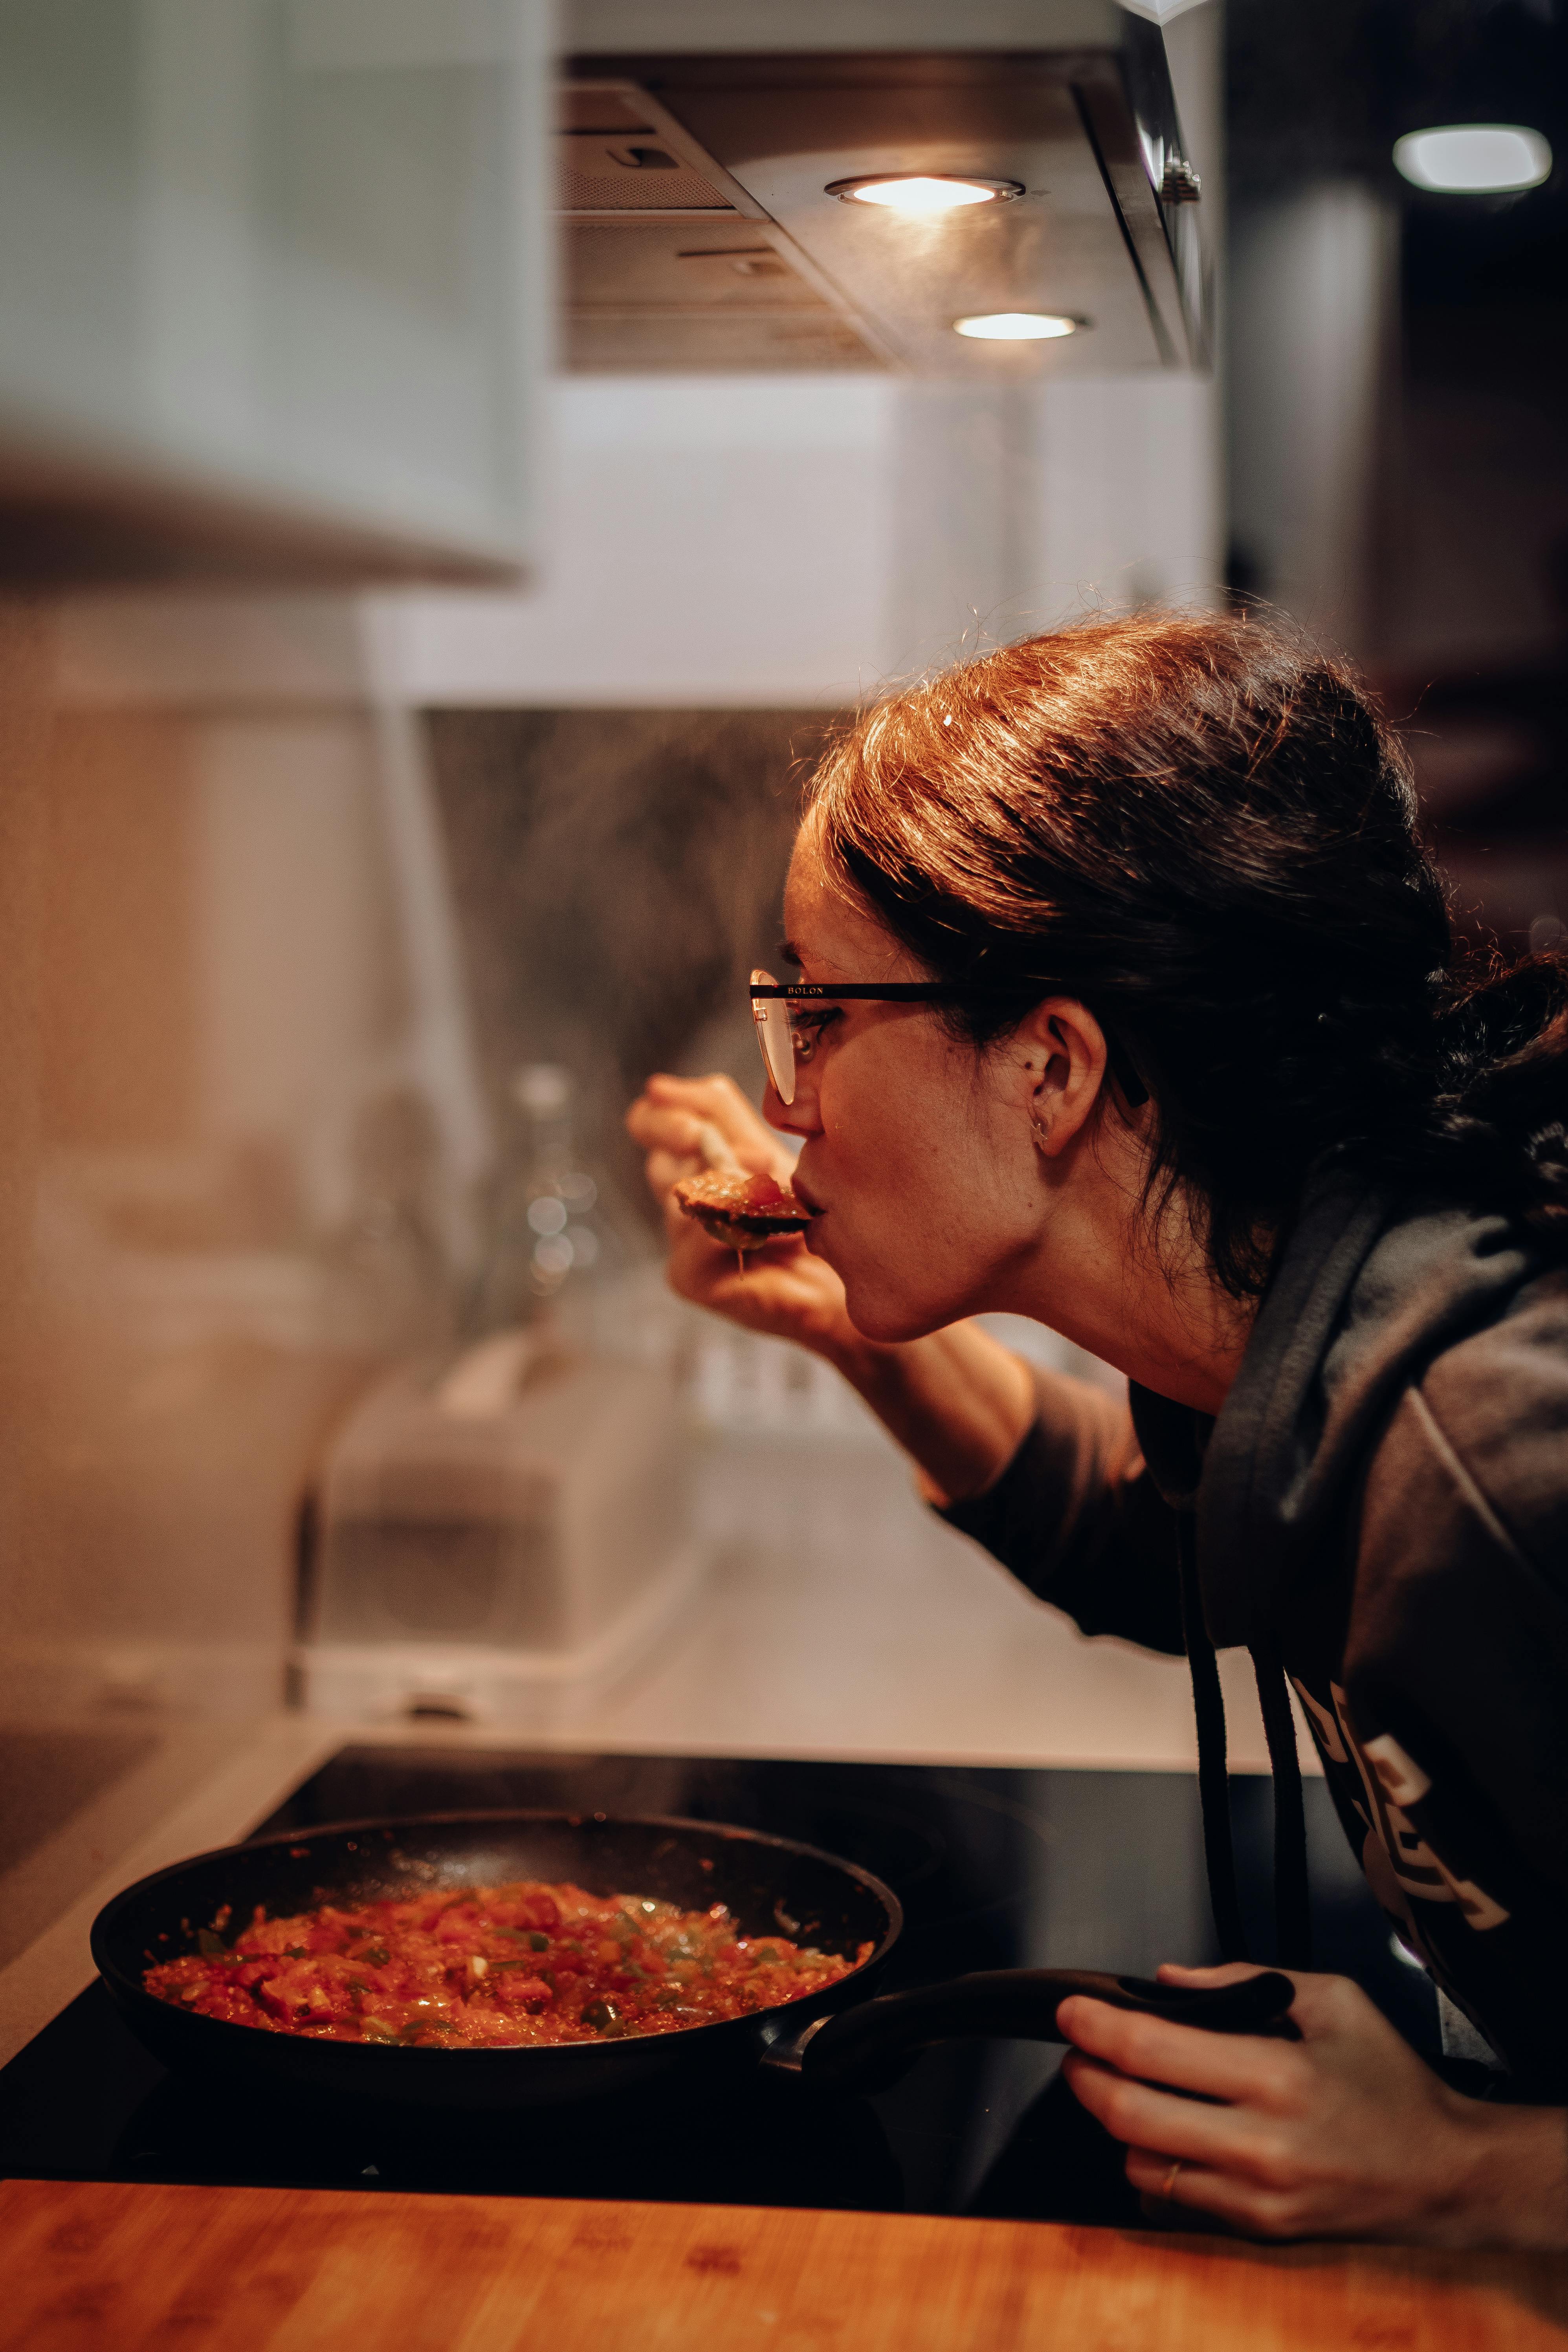 A woman cooking | Source: Pexels